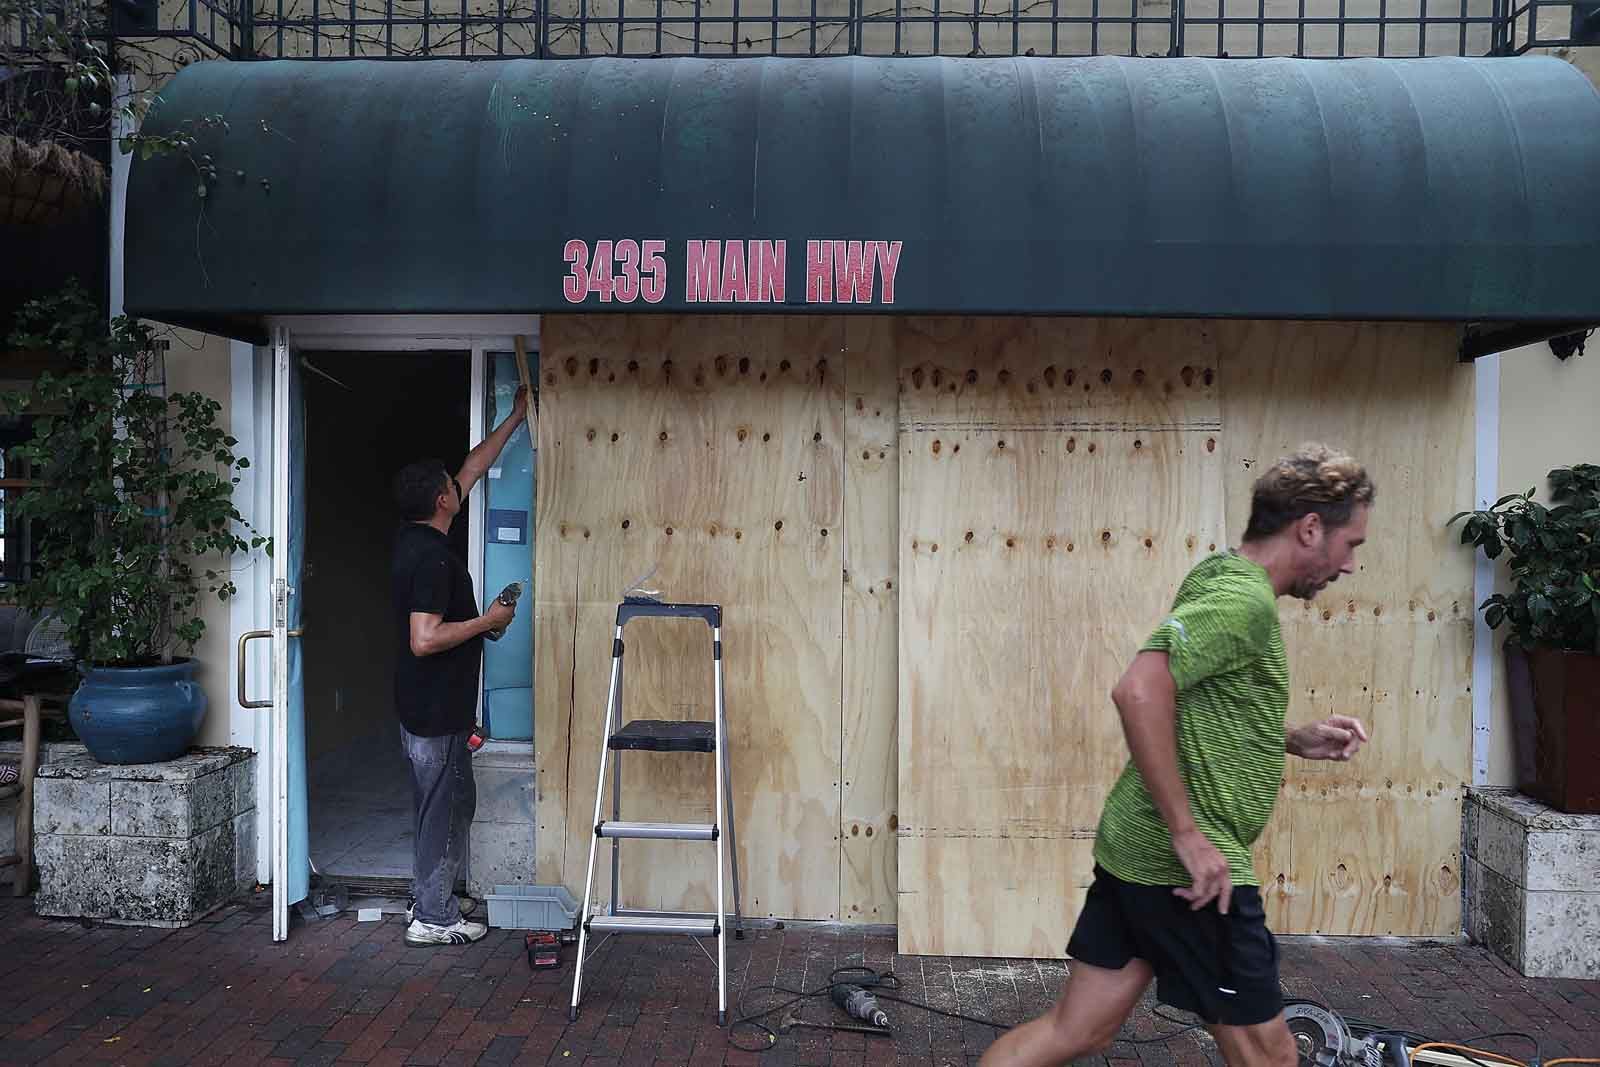 Samuel Bonia puts plywood over windows of a business as they prepare for Hurricane Irma on Sept. 6, 2017 in Miami, Florida. It's still too early to know where the direct impact of the hurricane will take place but the state of Florida is in the area of possible landfall.  (Photo by Joe Raedle/Getty Images)